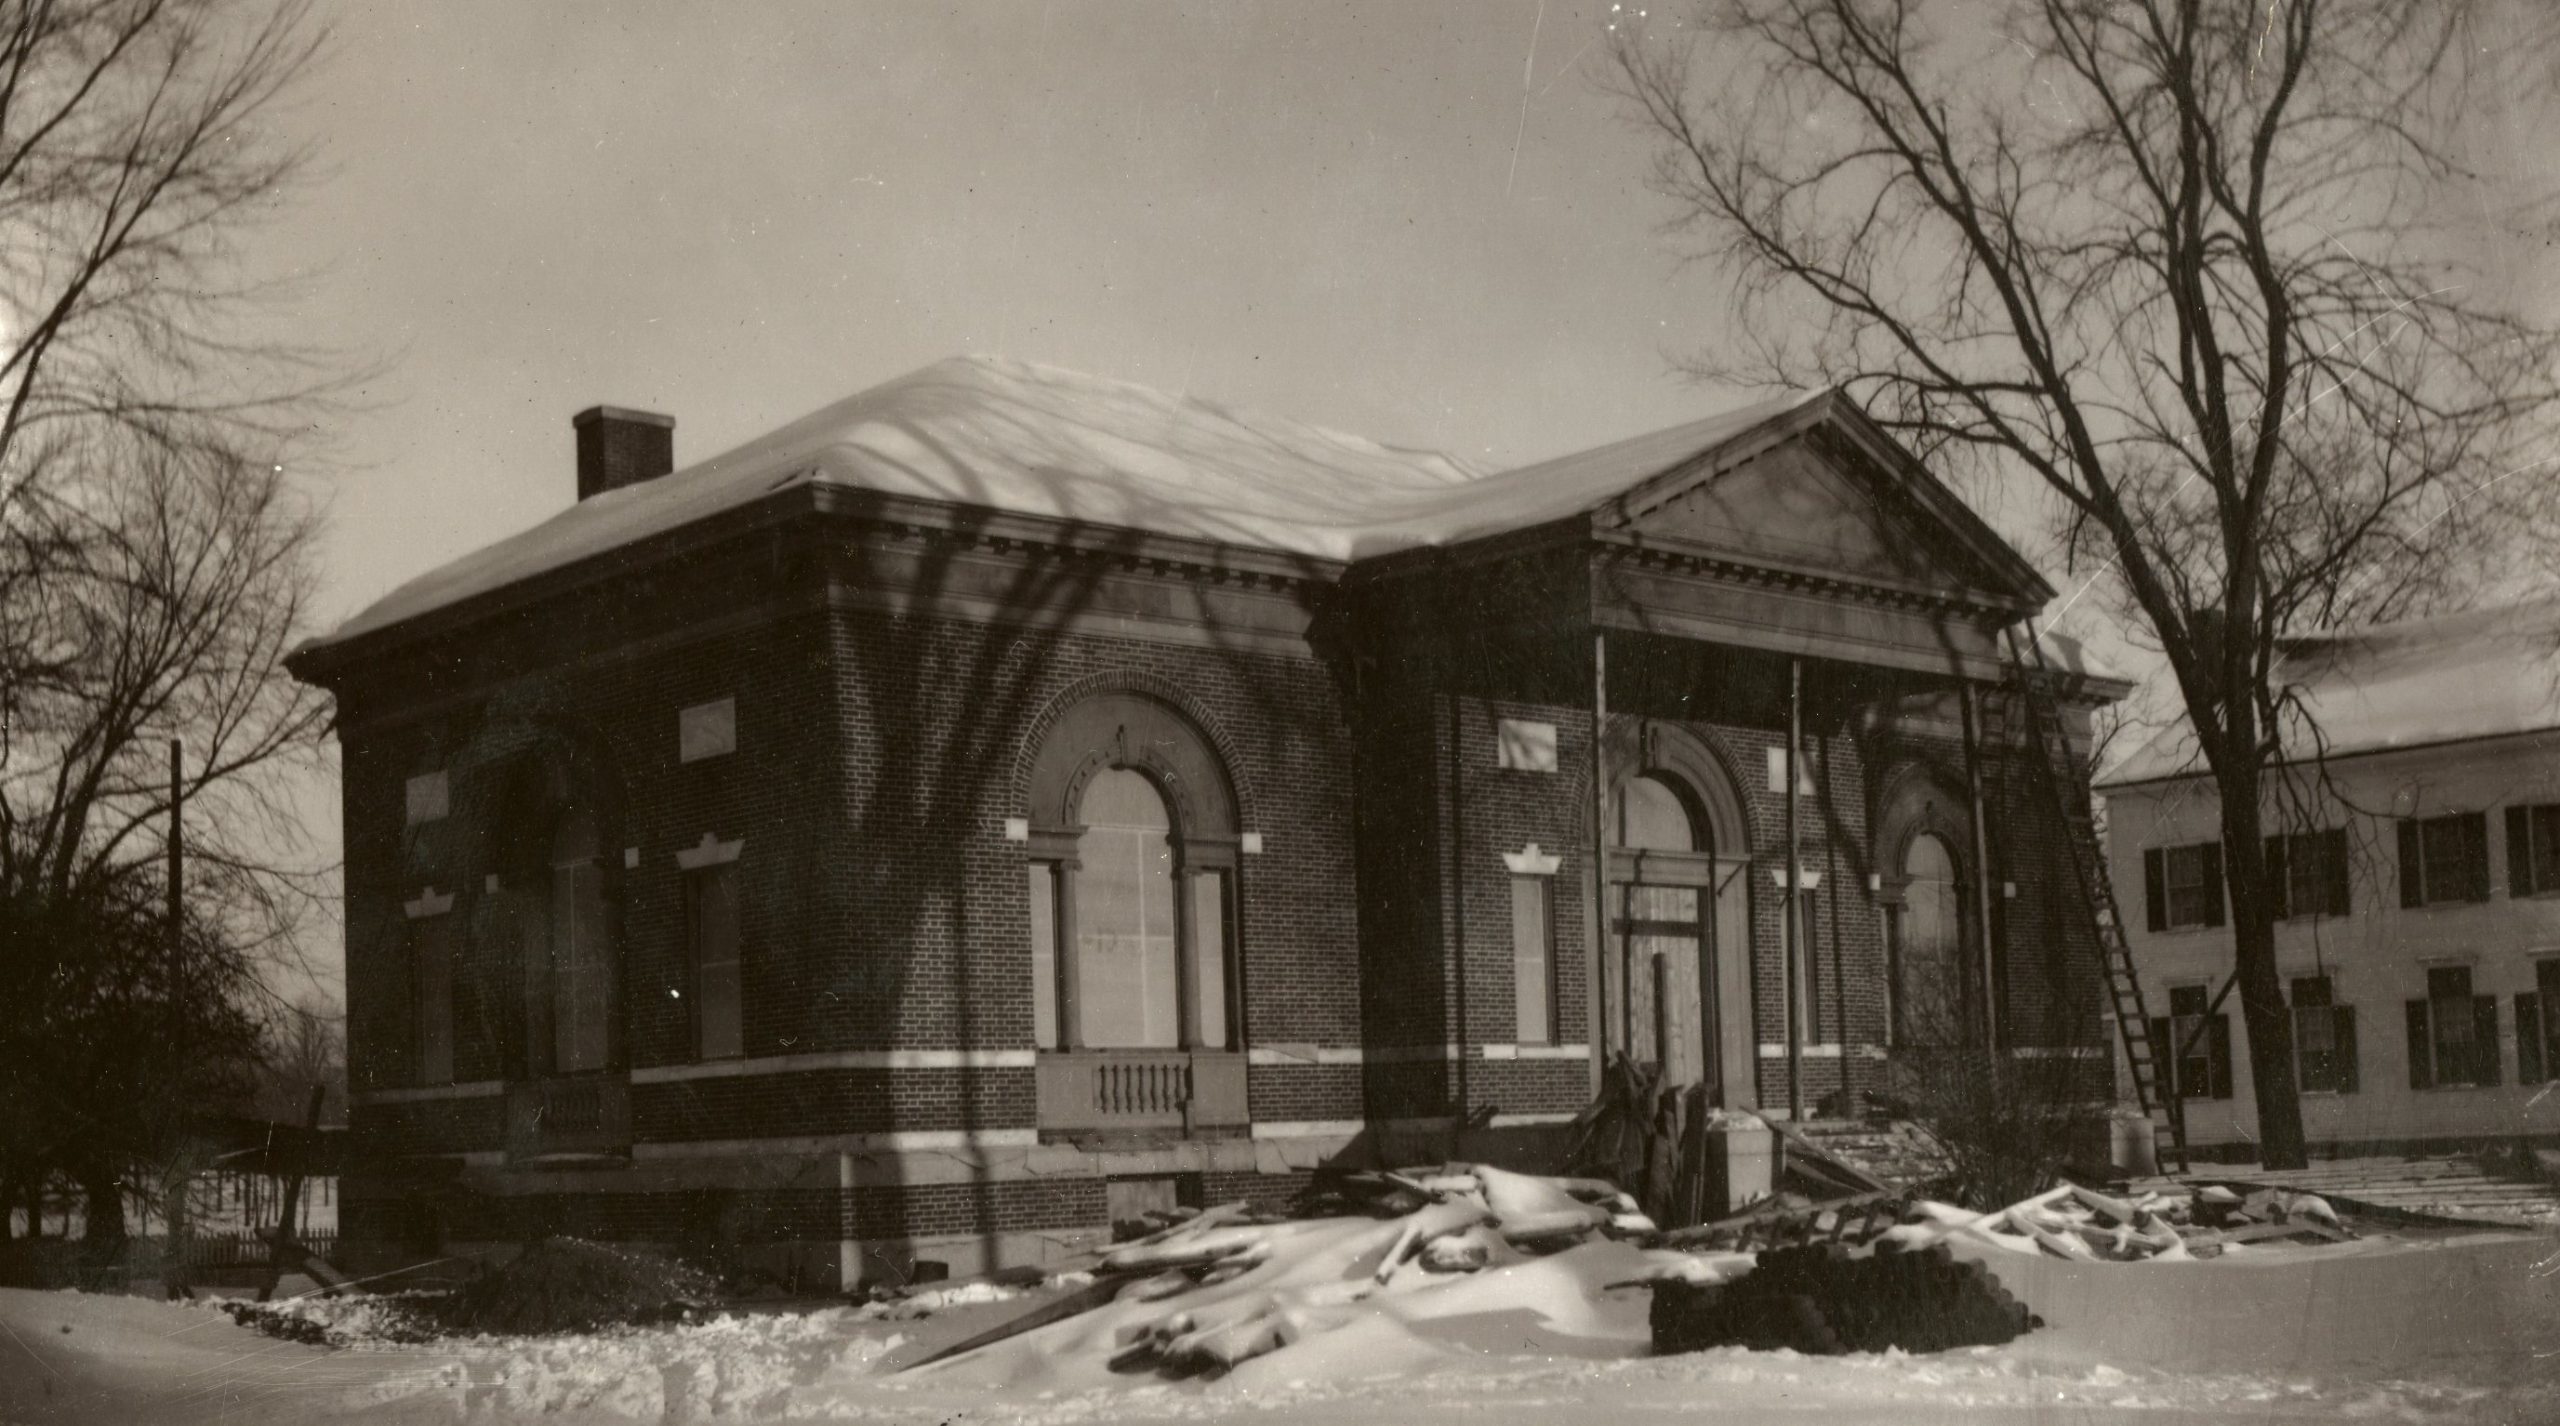 The building of the Kennebunk Free Library,1907